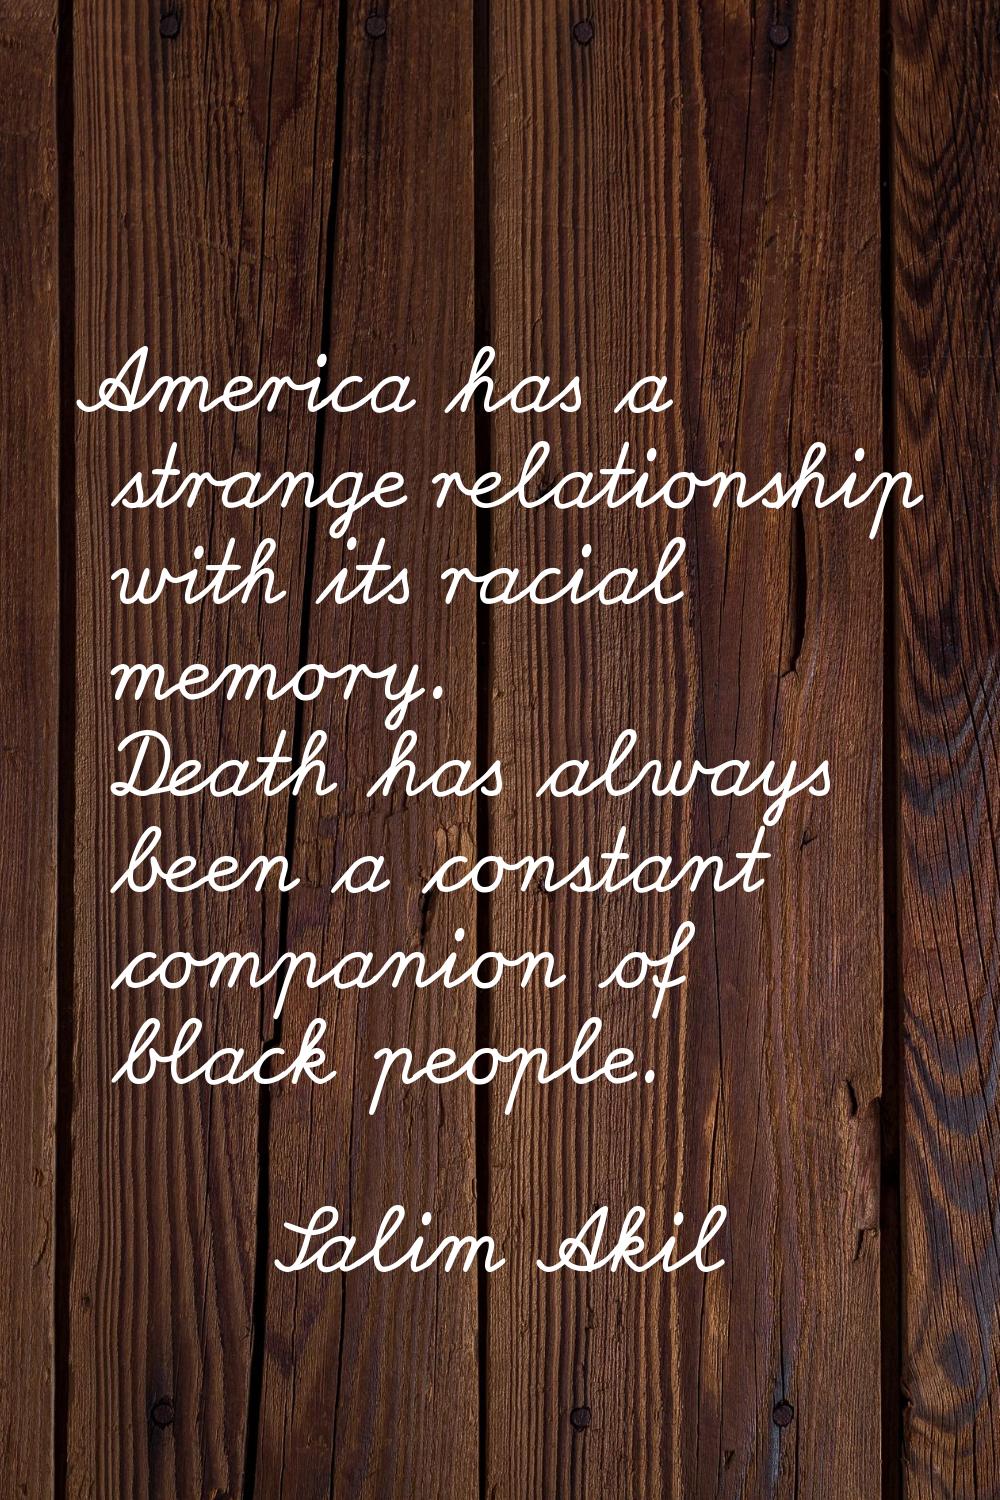 America has a strange relationship with its racial memory. Death has always been a constant compani